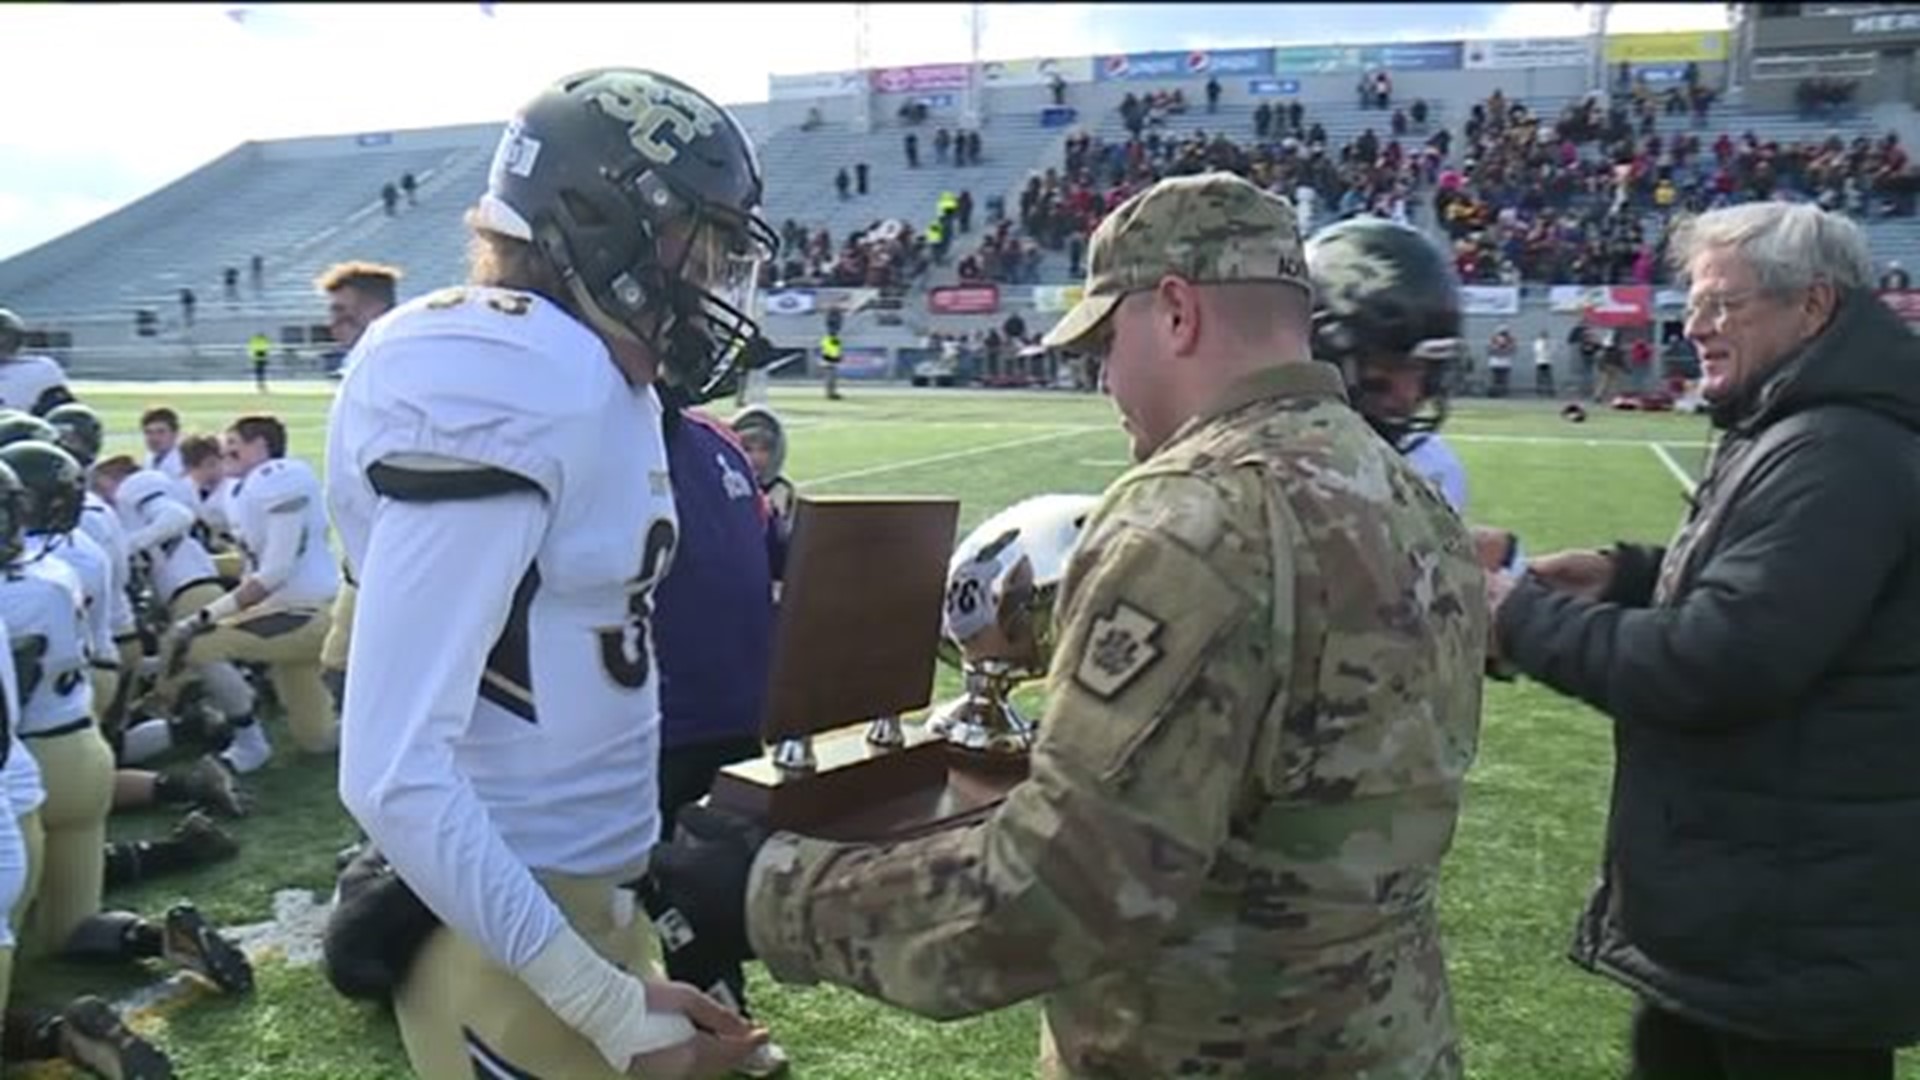 Southern Columbia Falls to Steel Valley in Title Game